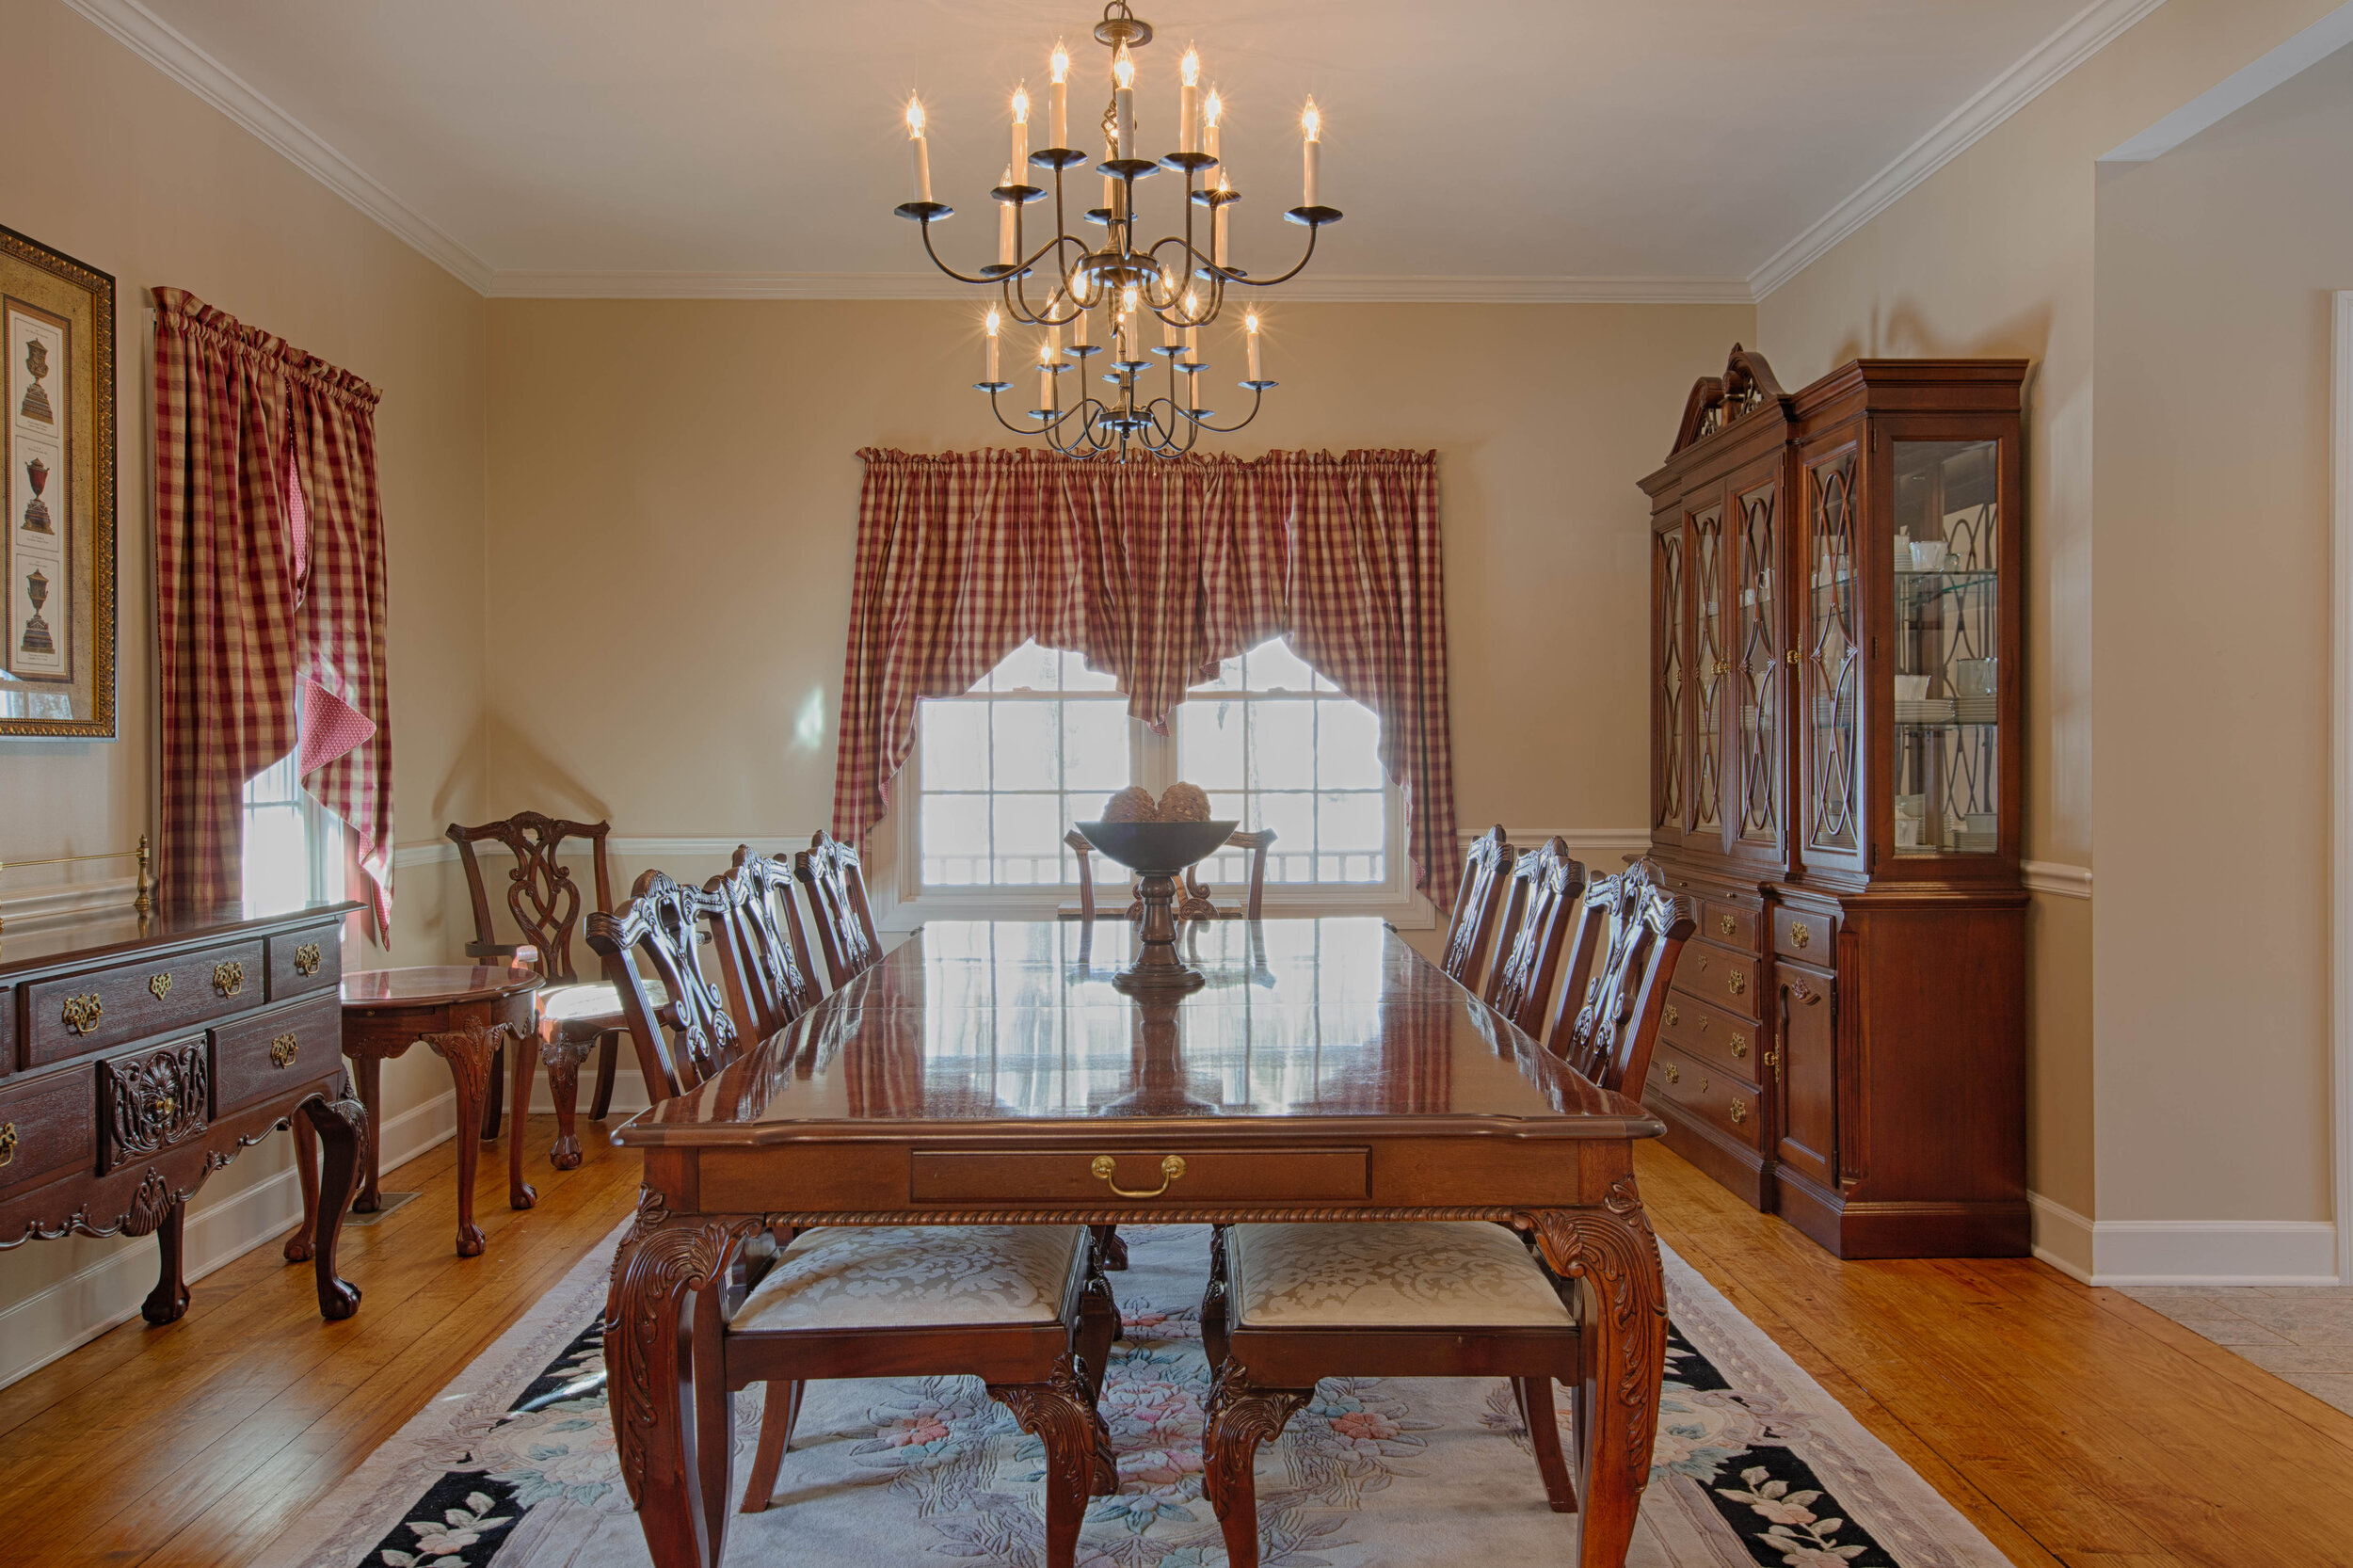  Dining room with large table in center along with a double window in the center of the wall and a hutch to the right of the photo. 